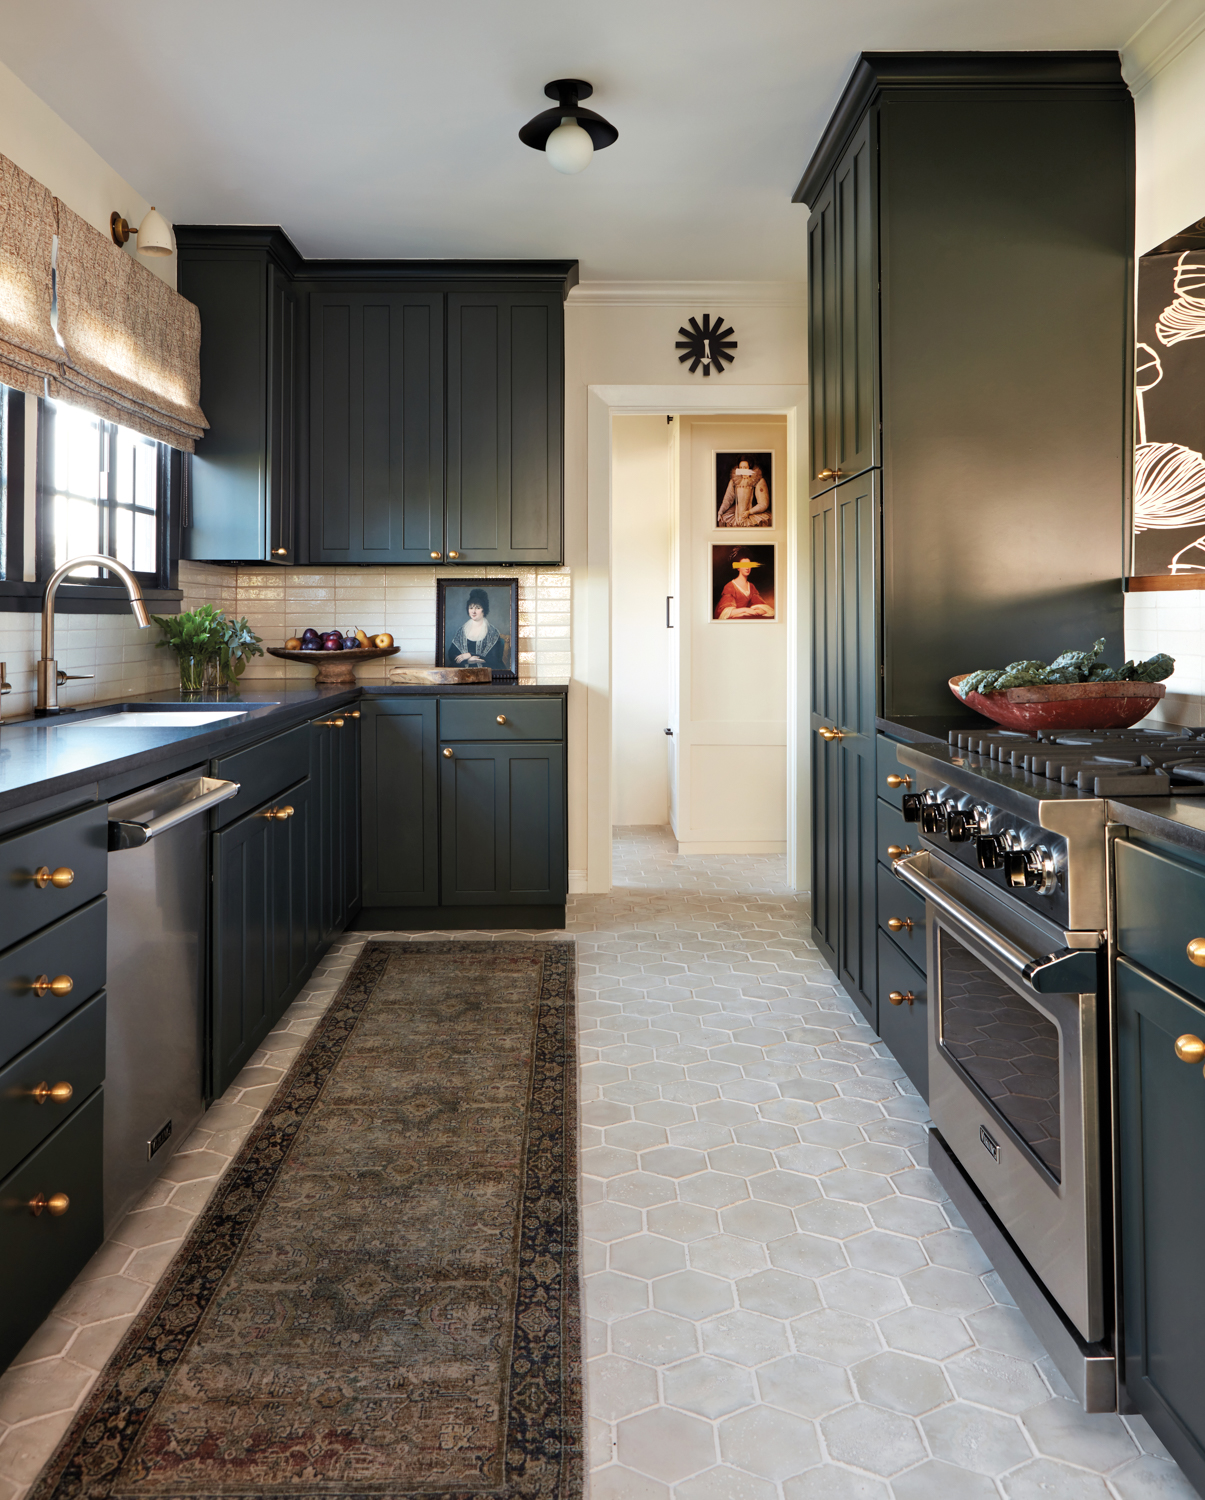 A kitchen with dark-green cabinetry...